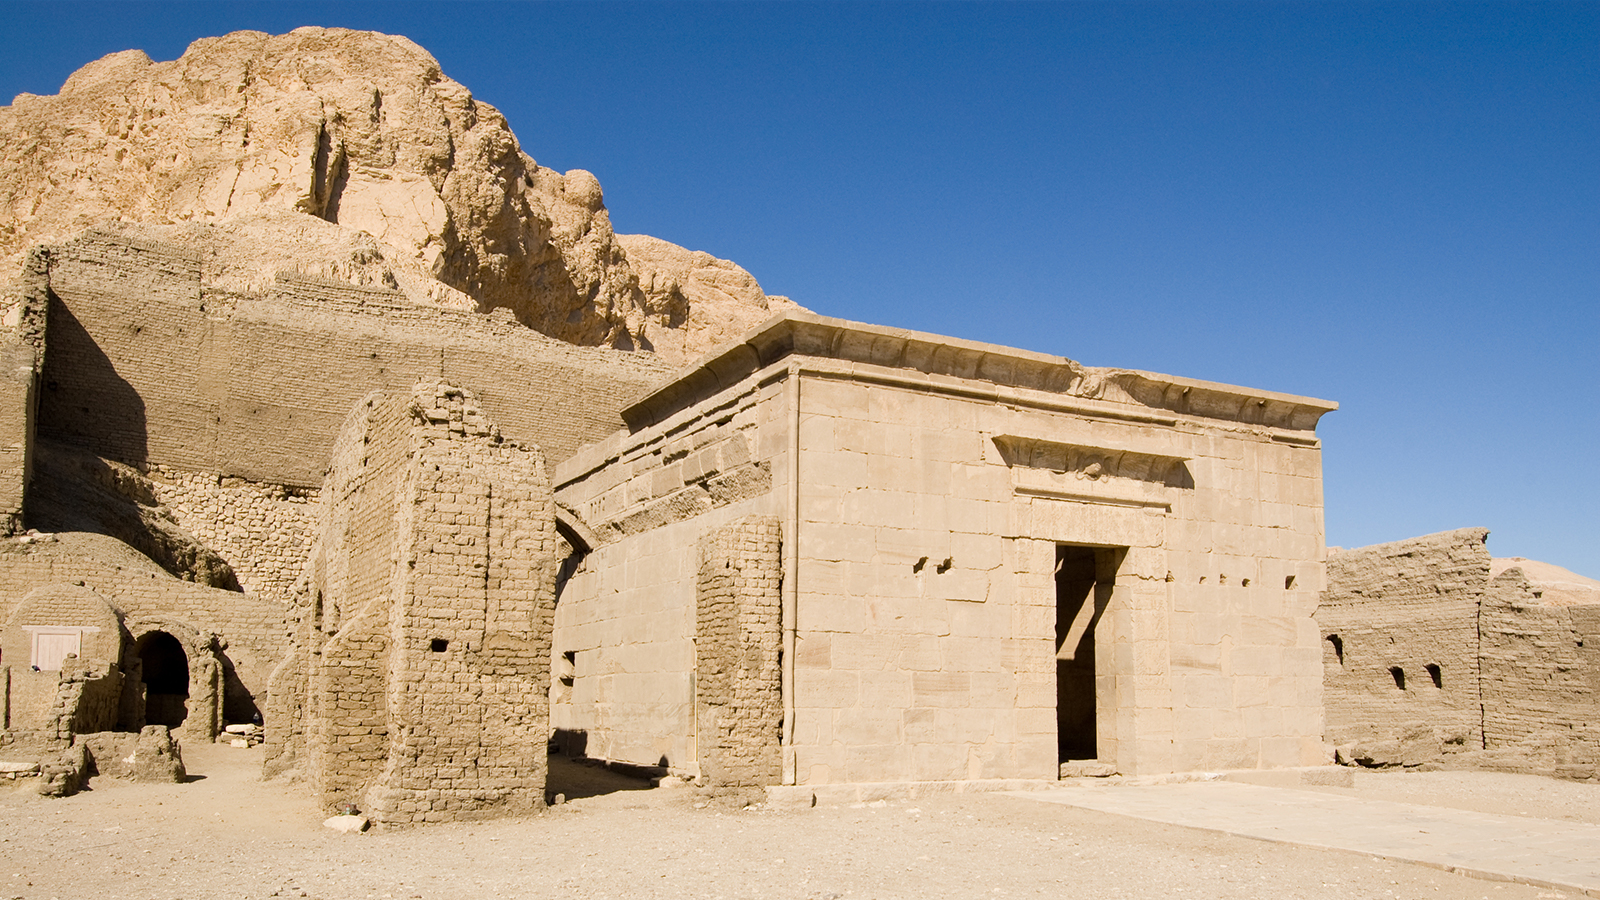 Ancient temple build into rocks in Egypt